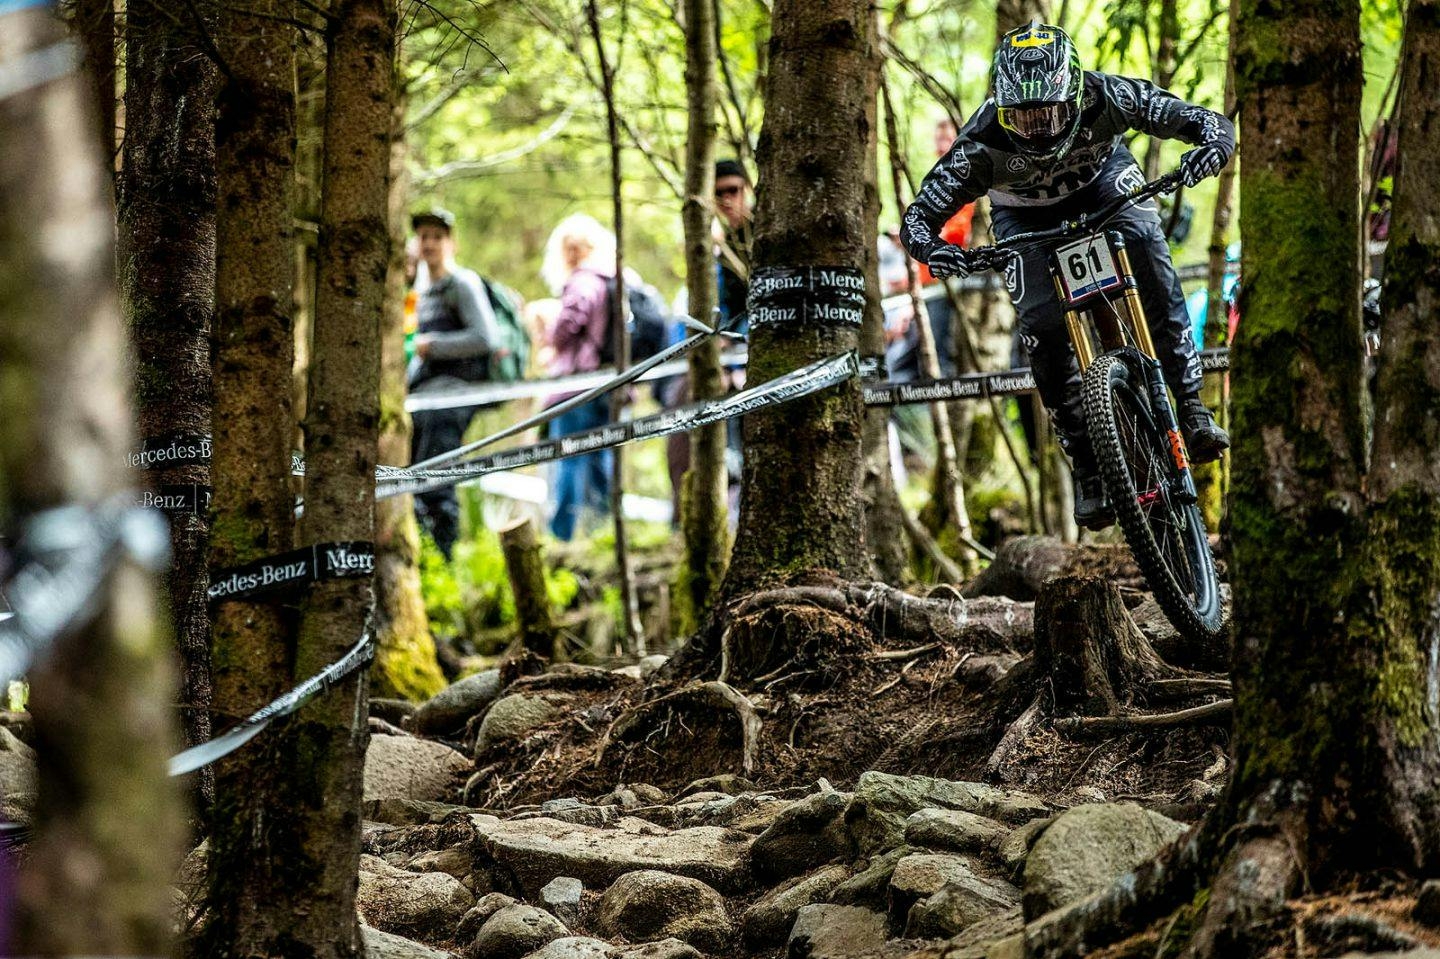 Fort William World Cup - Riding into a rock garden